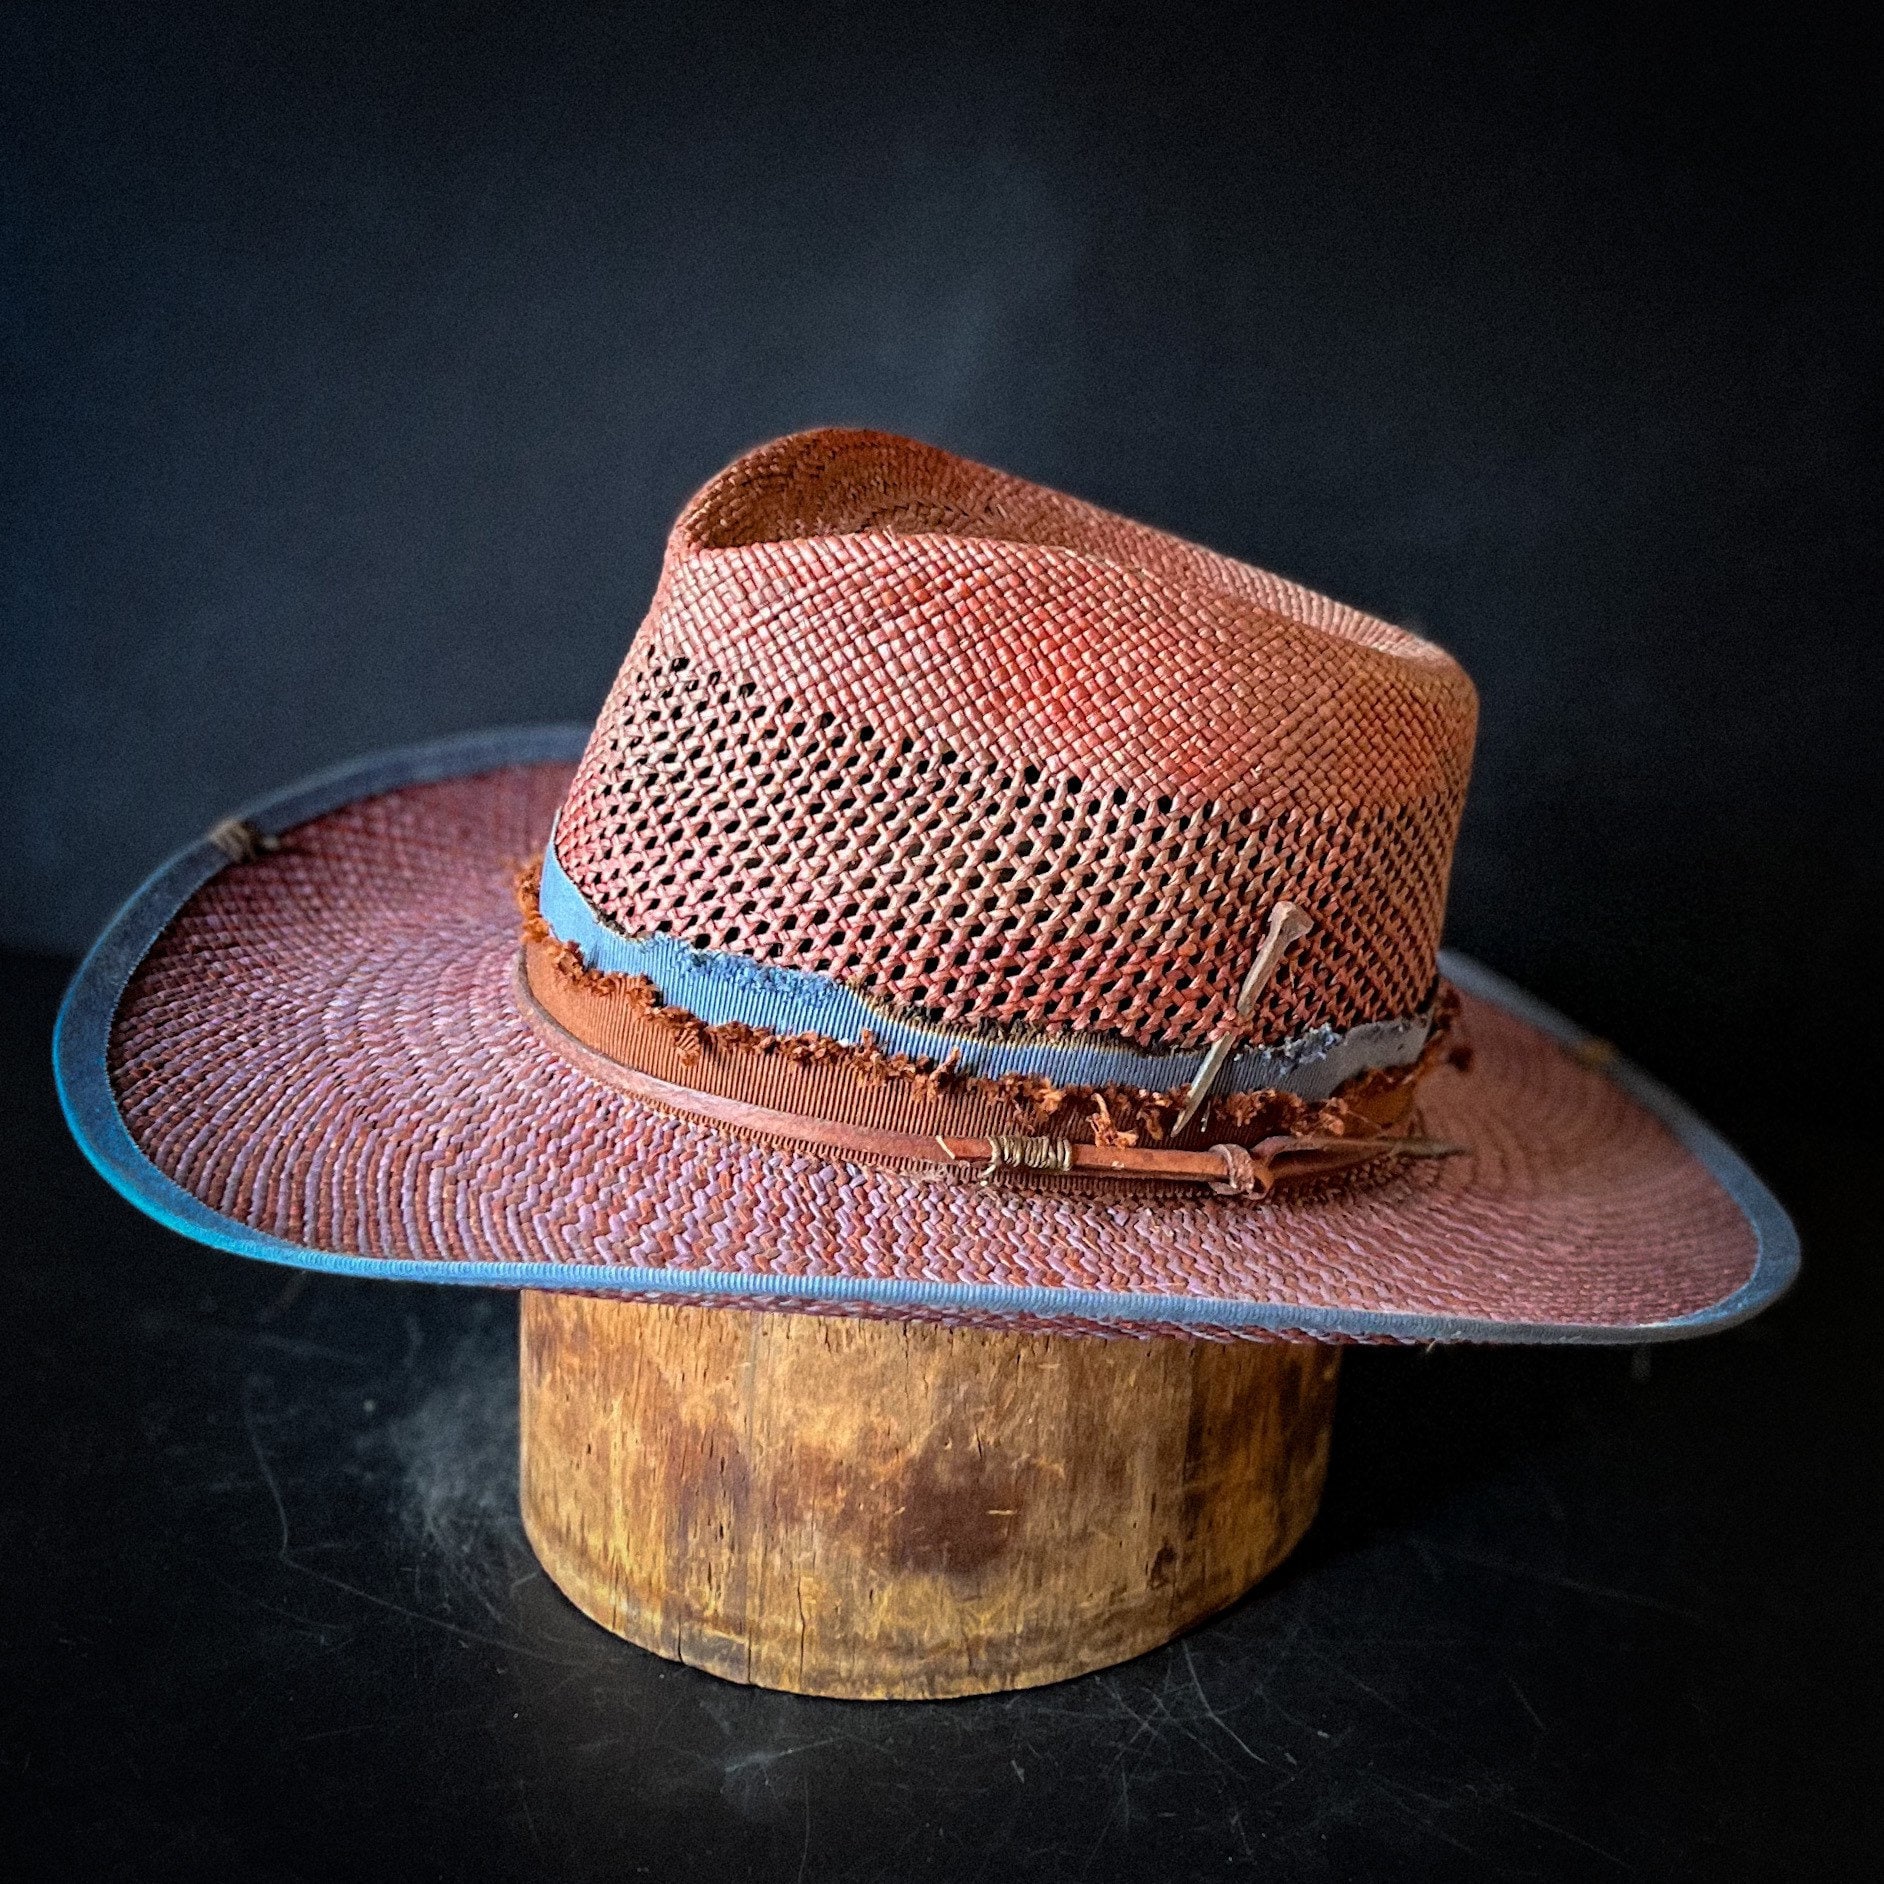 Straw cowboy hat size 6 7/8. The “Denim & Rust” from Ugly Outlaw.